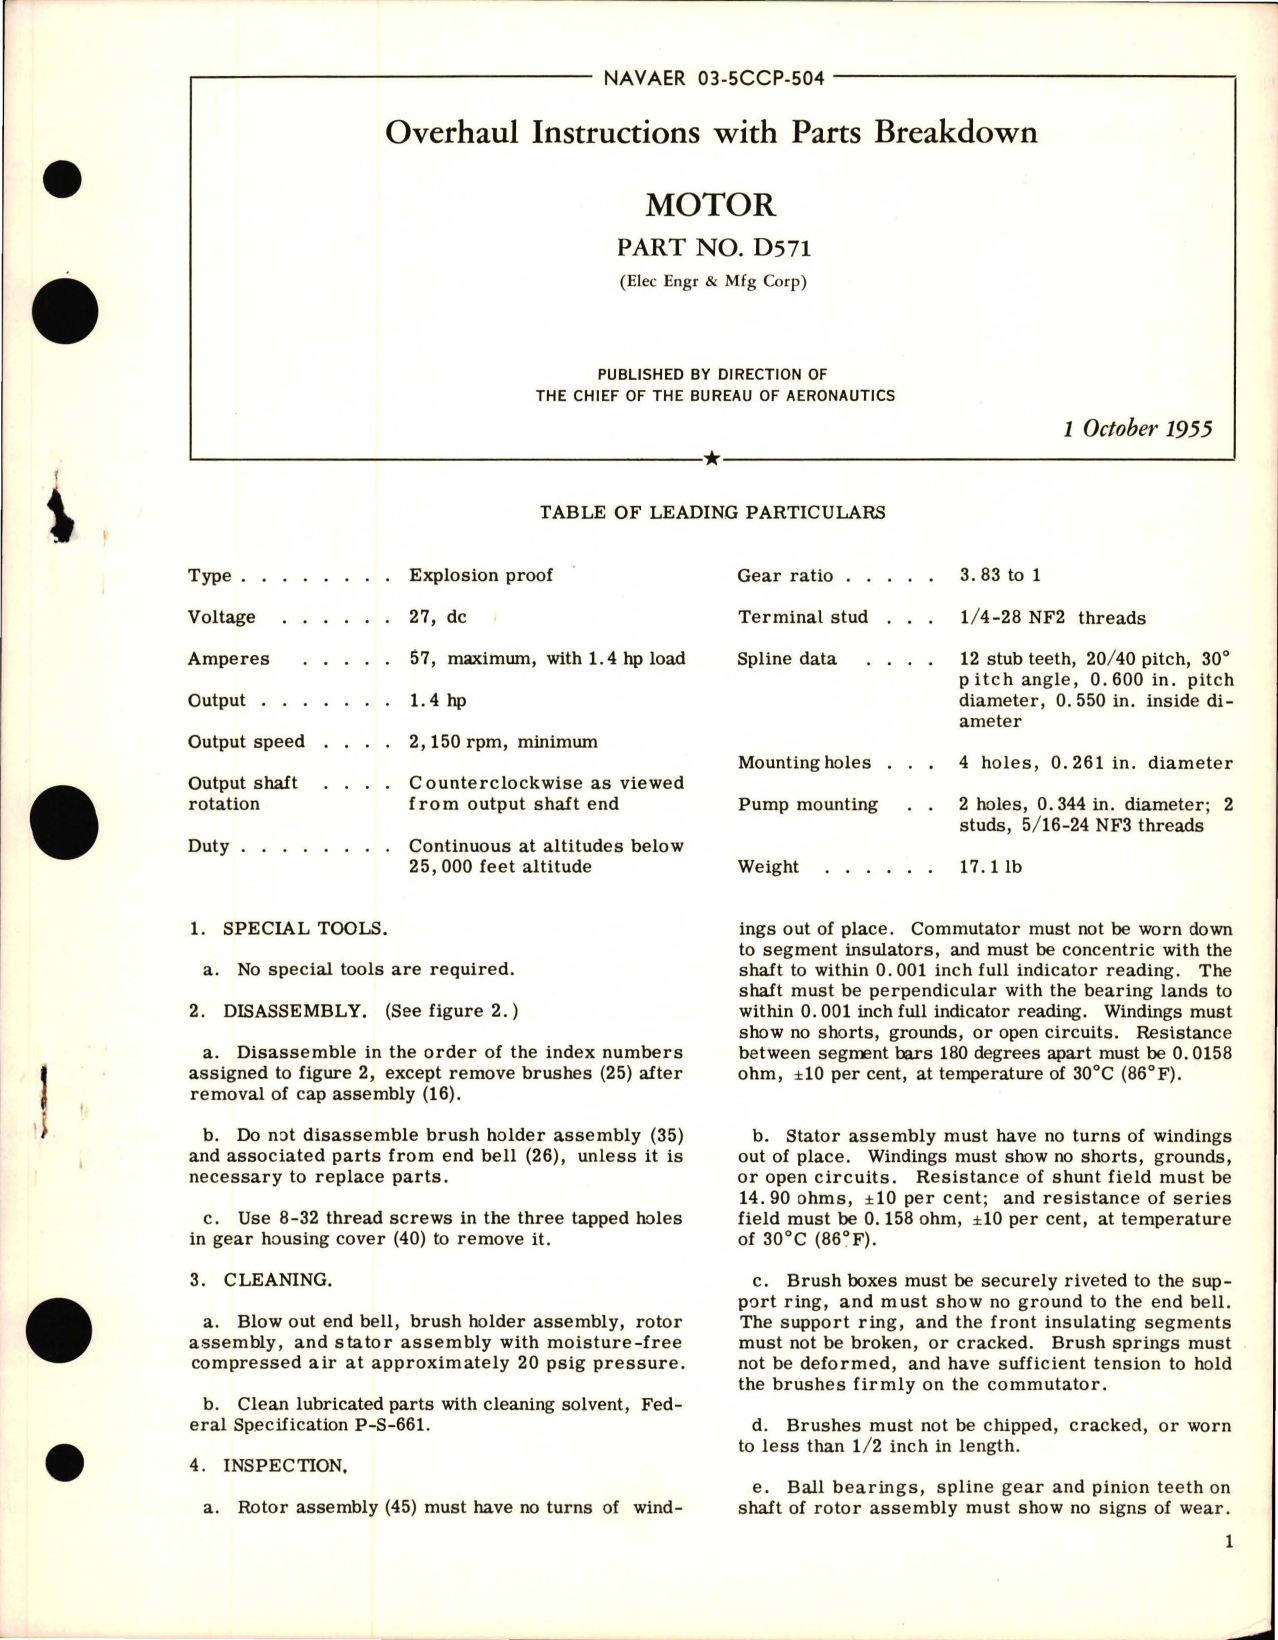 Sample page 1 from AirCorps Library document: Overhaul Instructions with Parts Breakdown for Motor - Part D571 